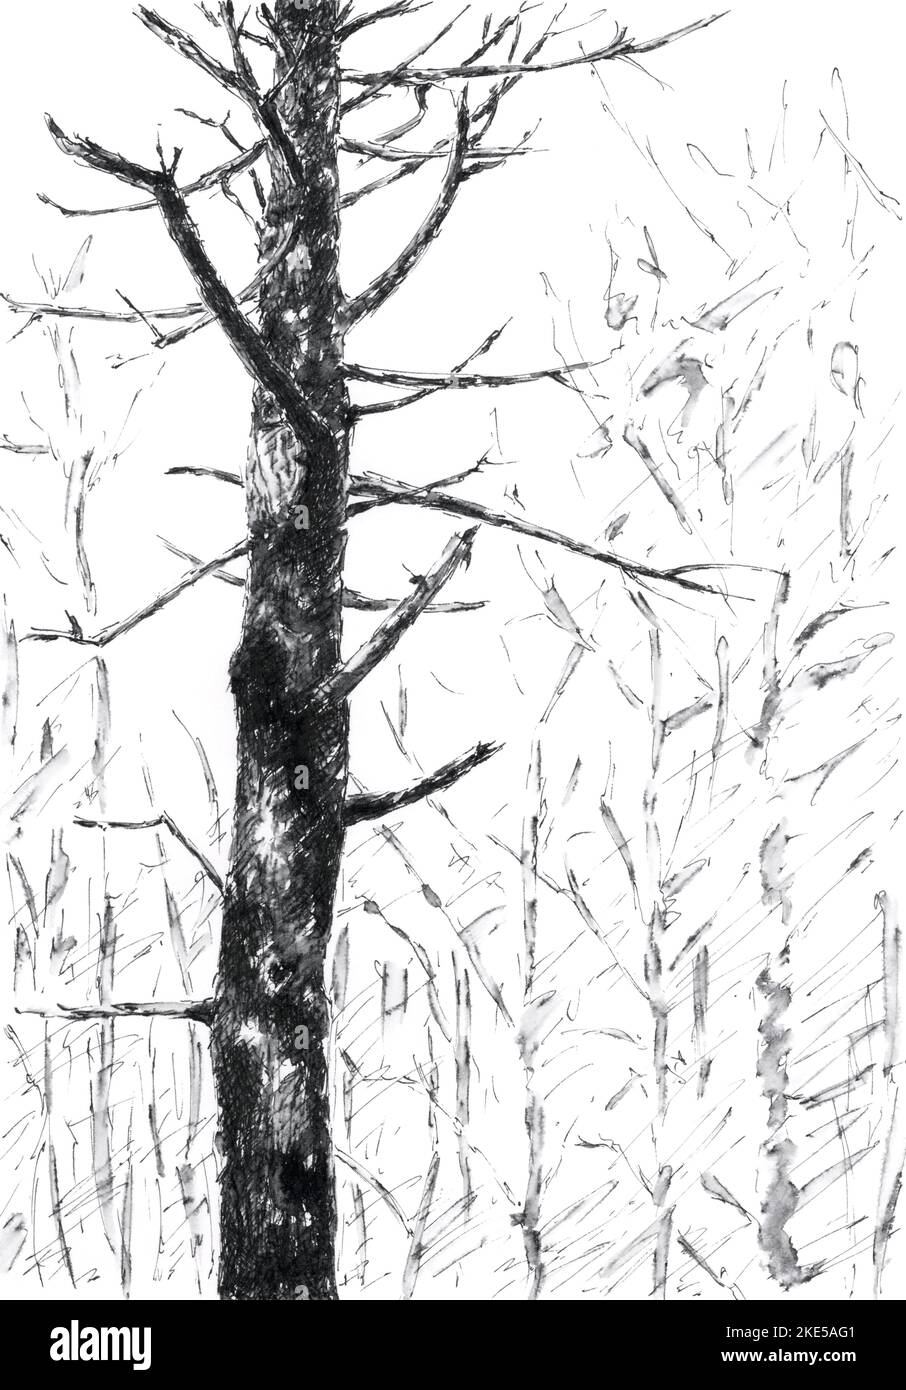 Tree trunk with branches. Ink on paper. Stock Photo